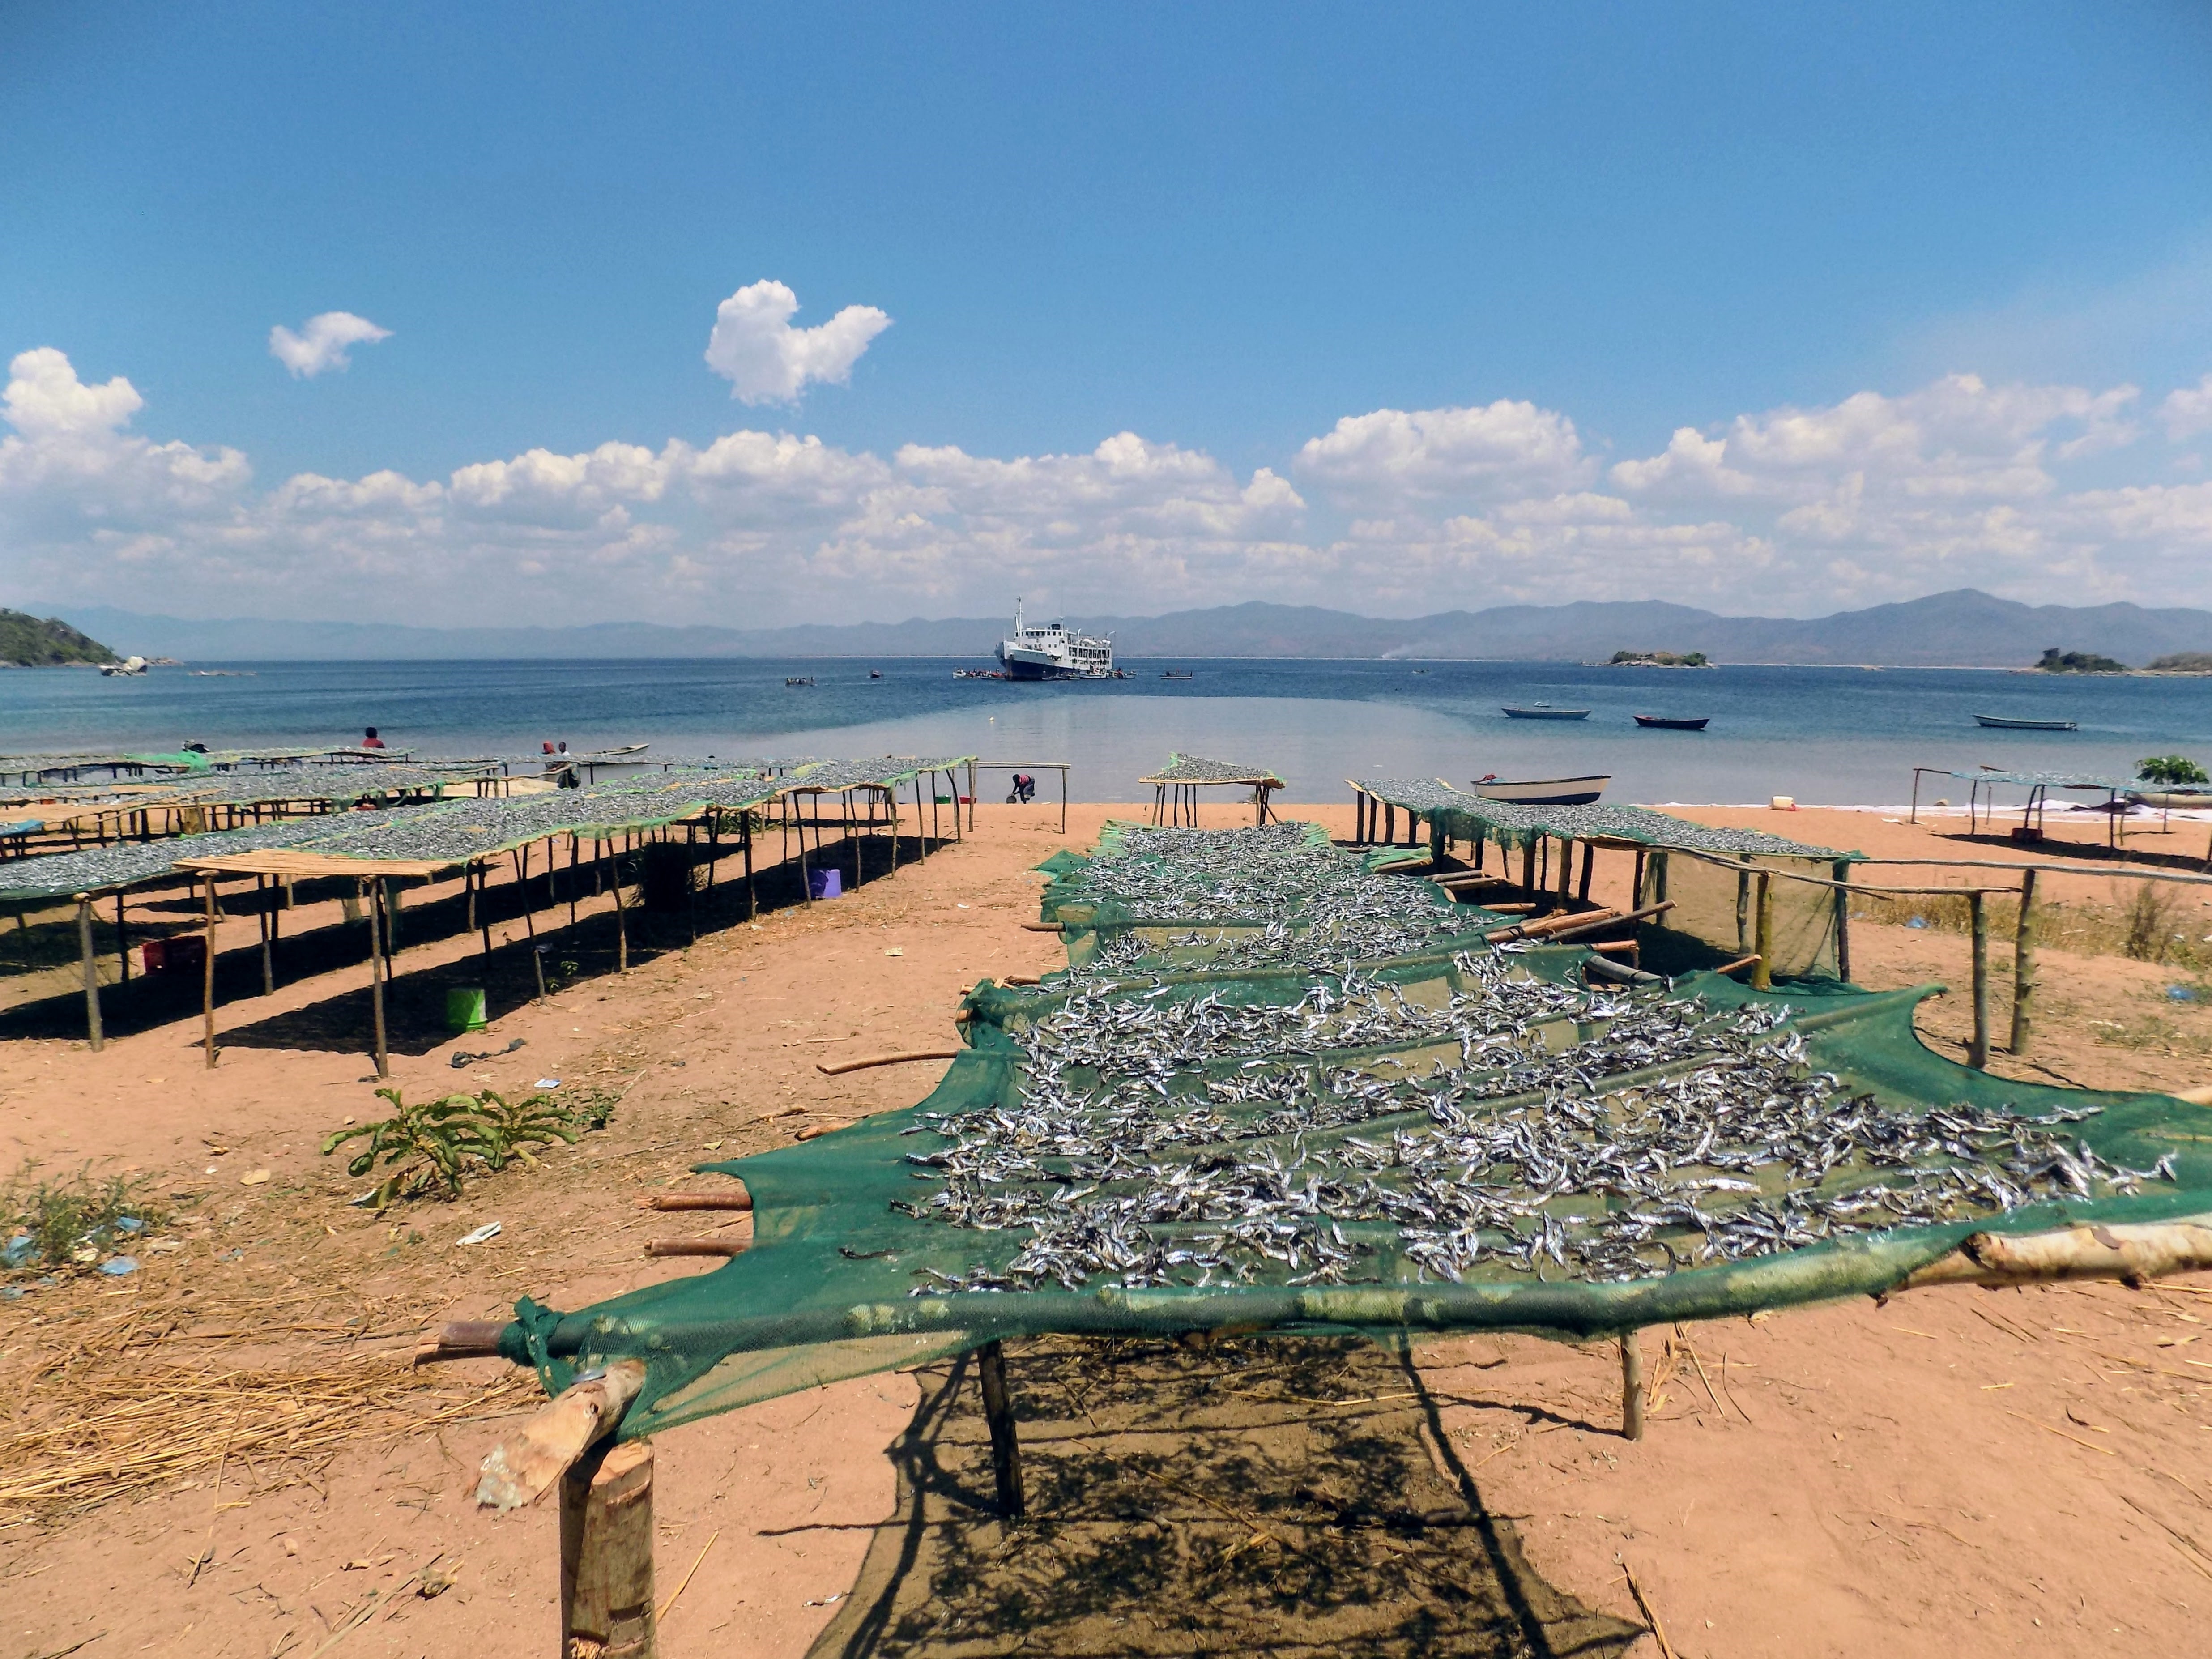 Small fish drying on the shores of Lake Malawi. Photo by Kate McMahon.